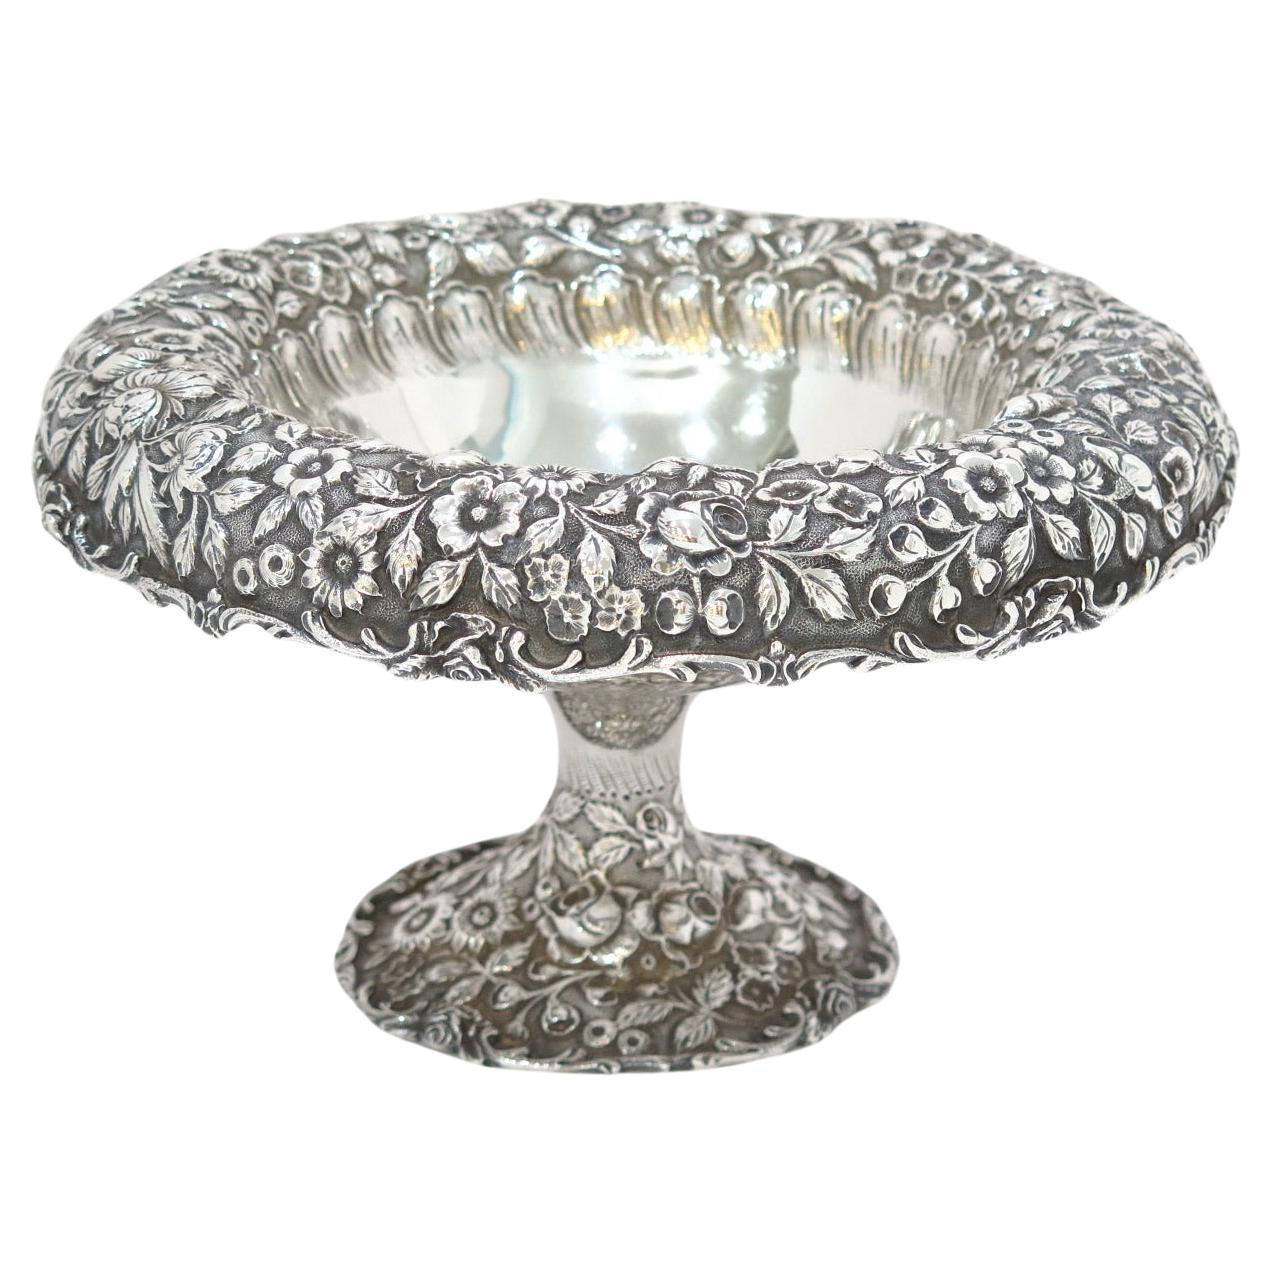 10.5" Sterling Silver A. G. Schultz Antique Floral Repousse Footed Serving Bowl For Sale